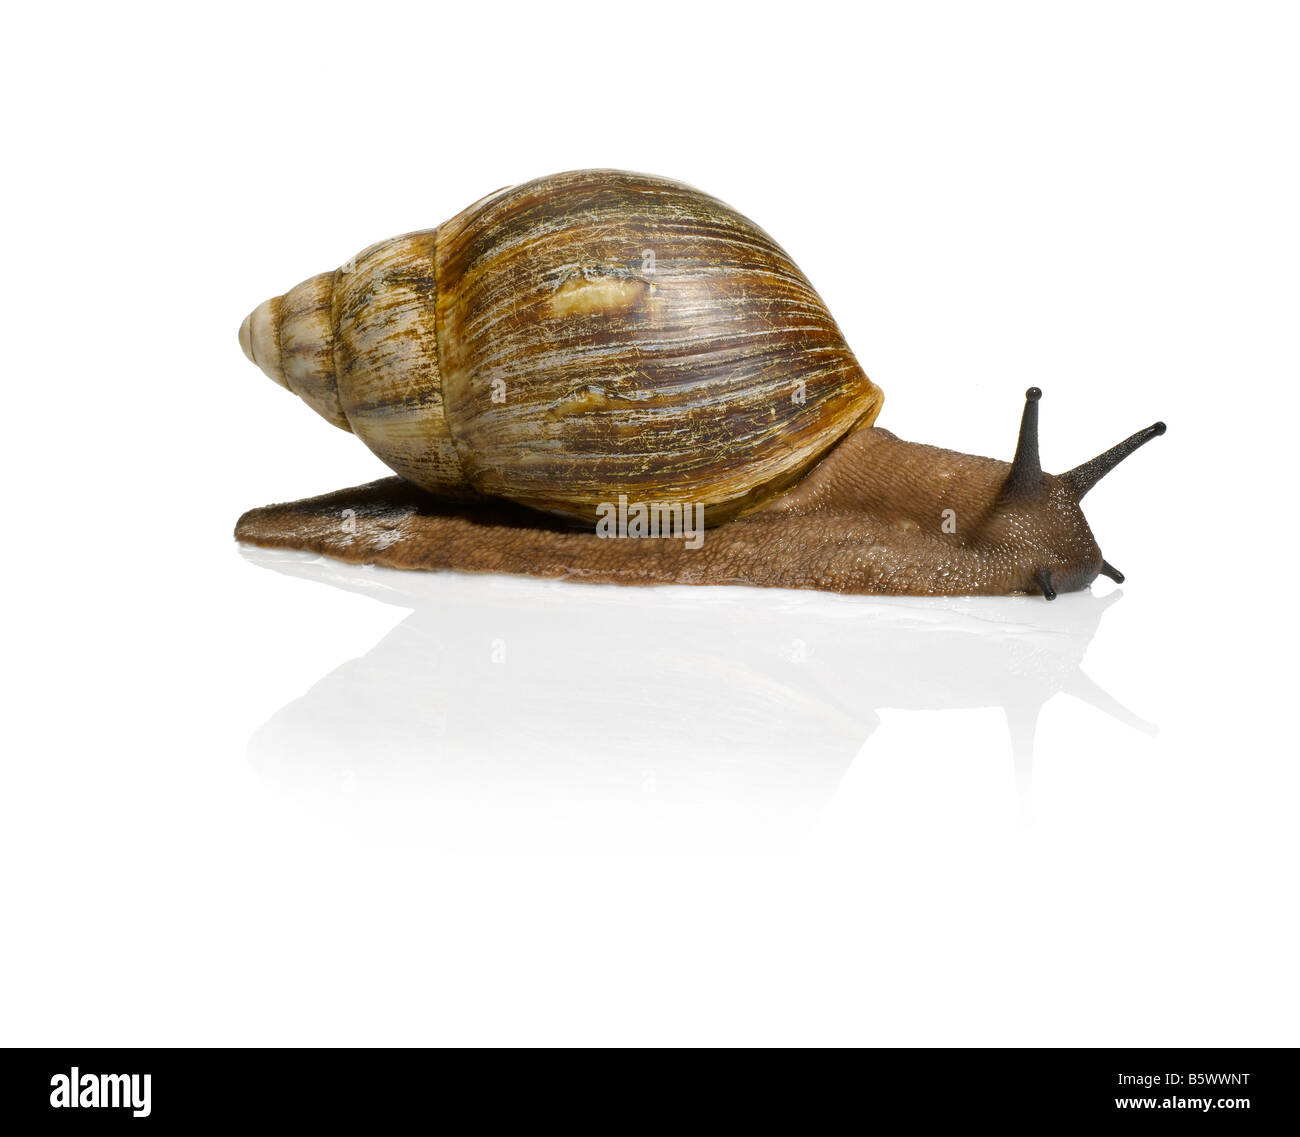 A giant African snail Stock Photo